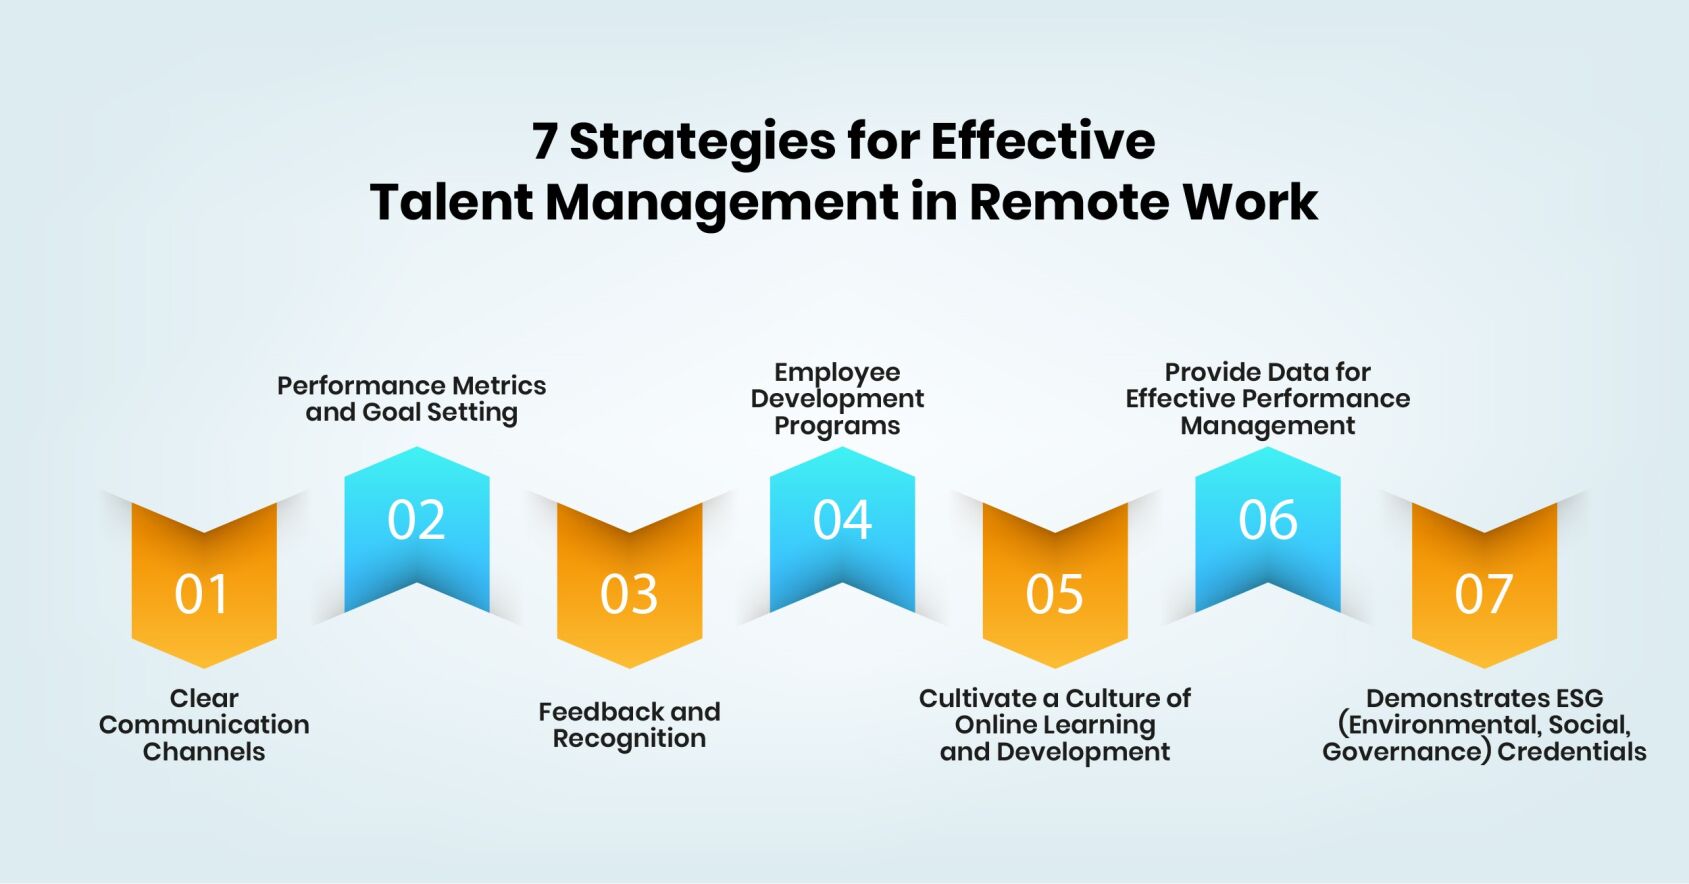 7 Strategies for Effective Talent Management in Remote Work